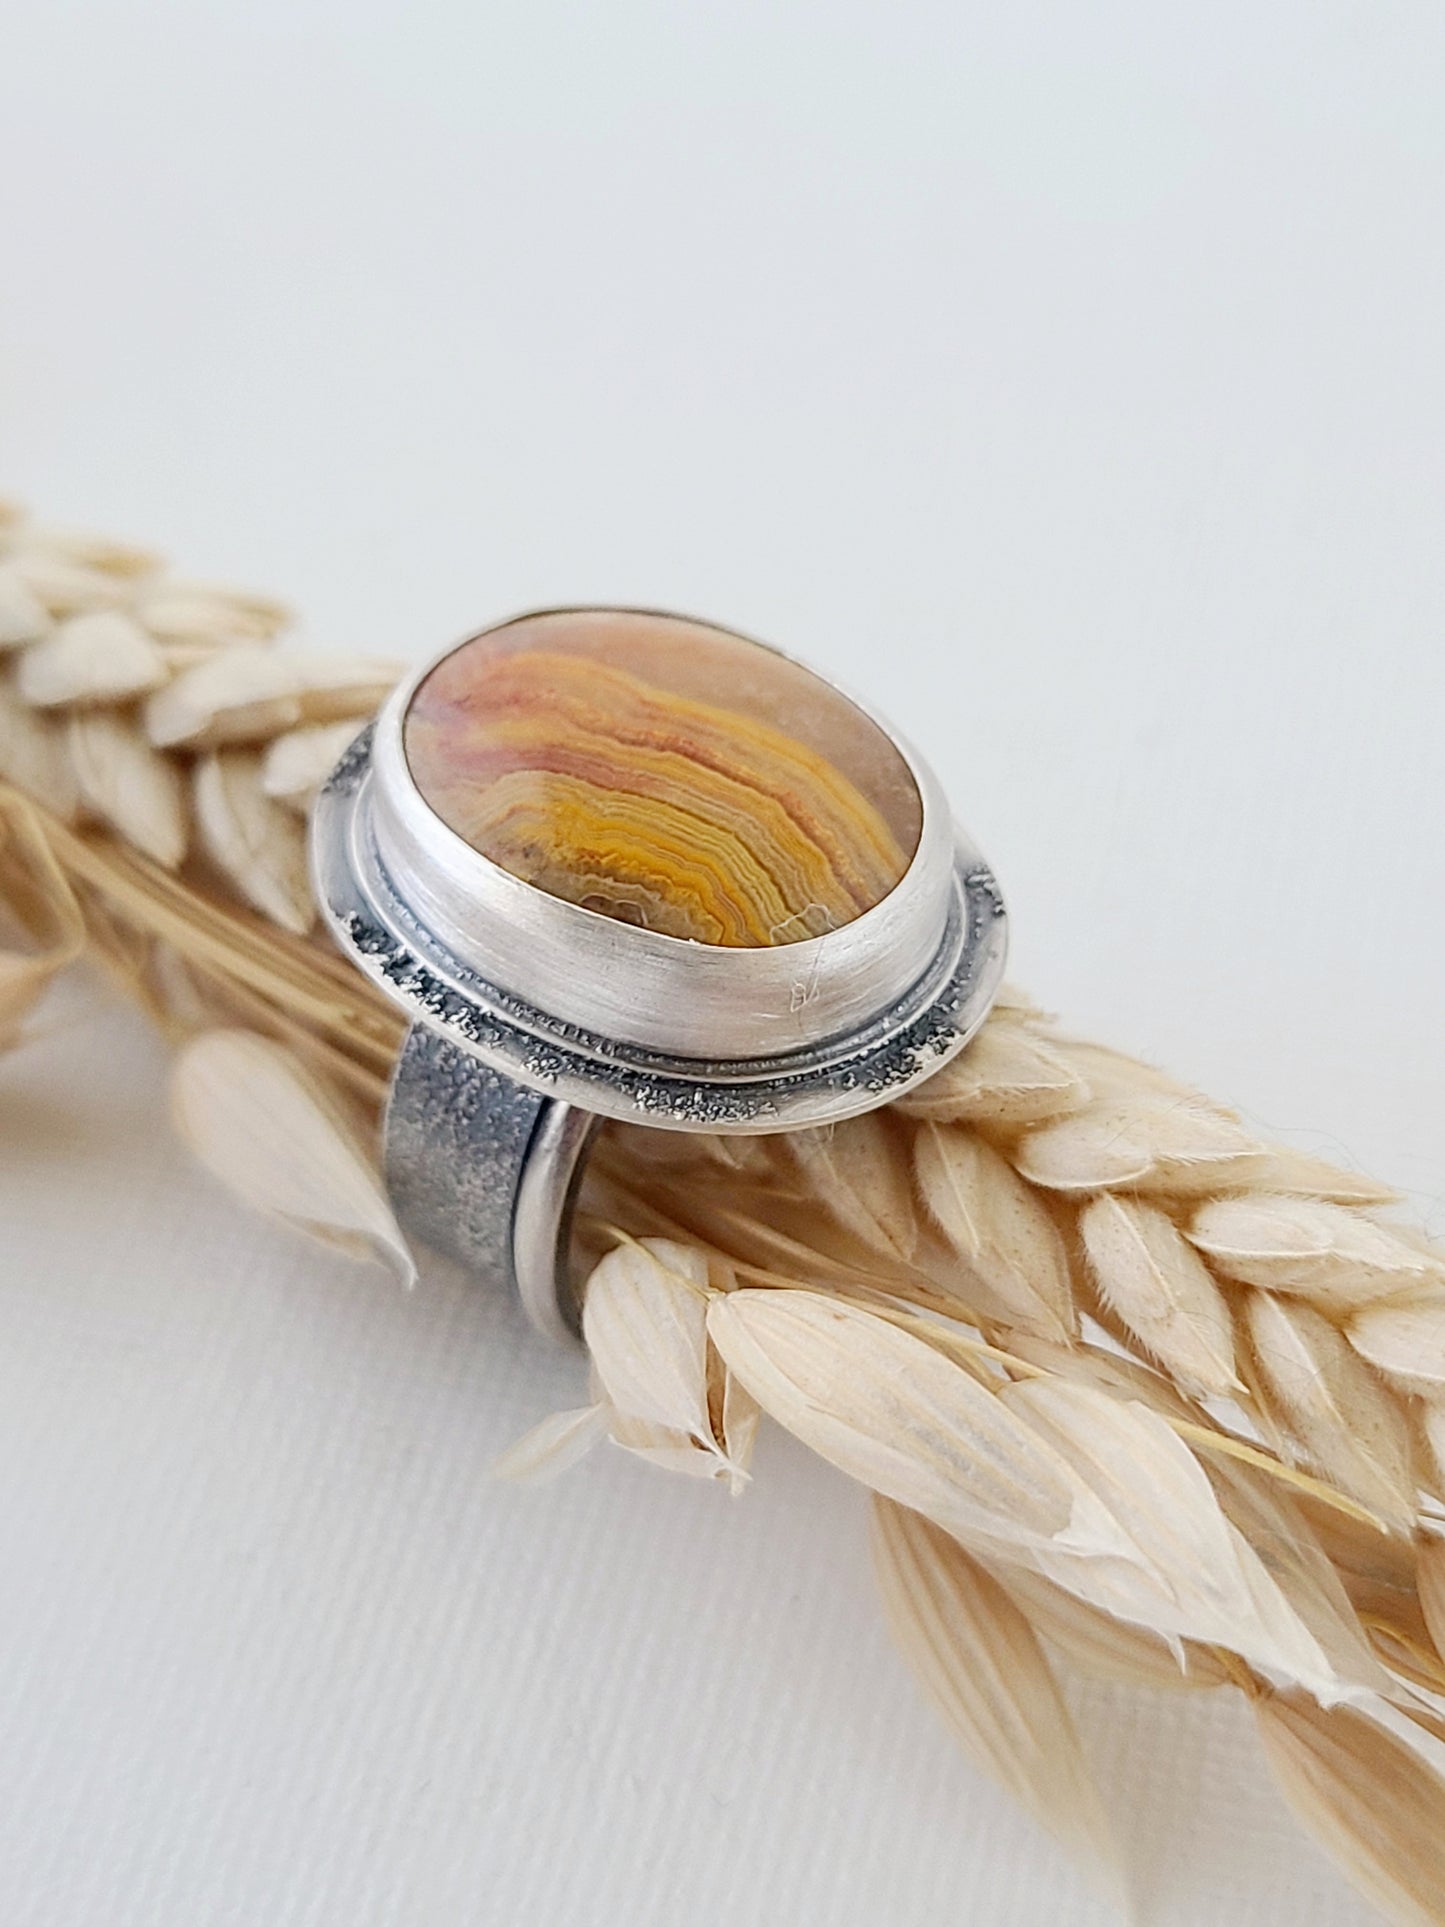 Australian Crazy Lace agate ring-size 8.75 US